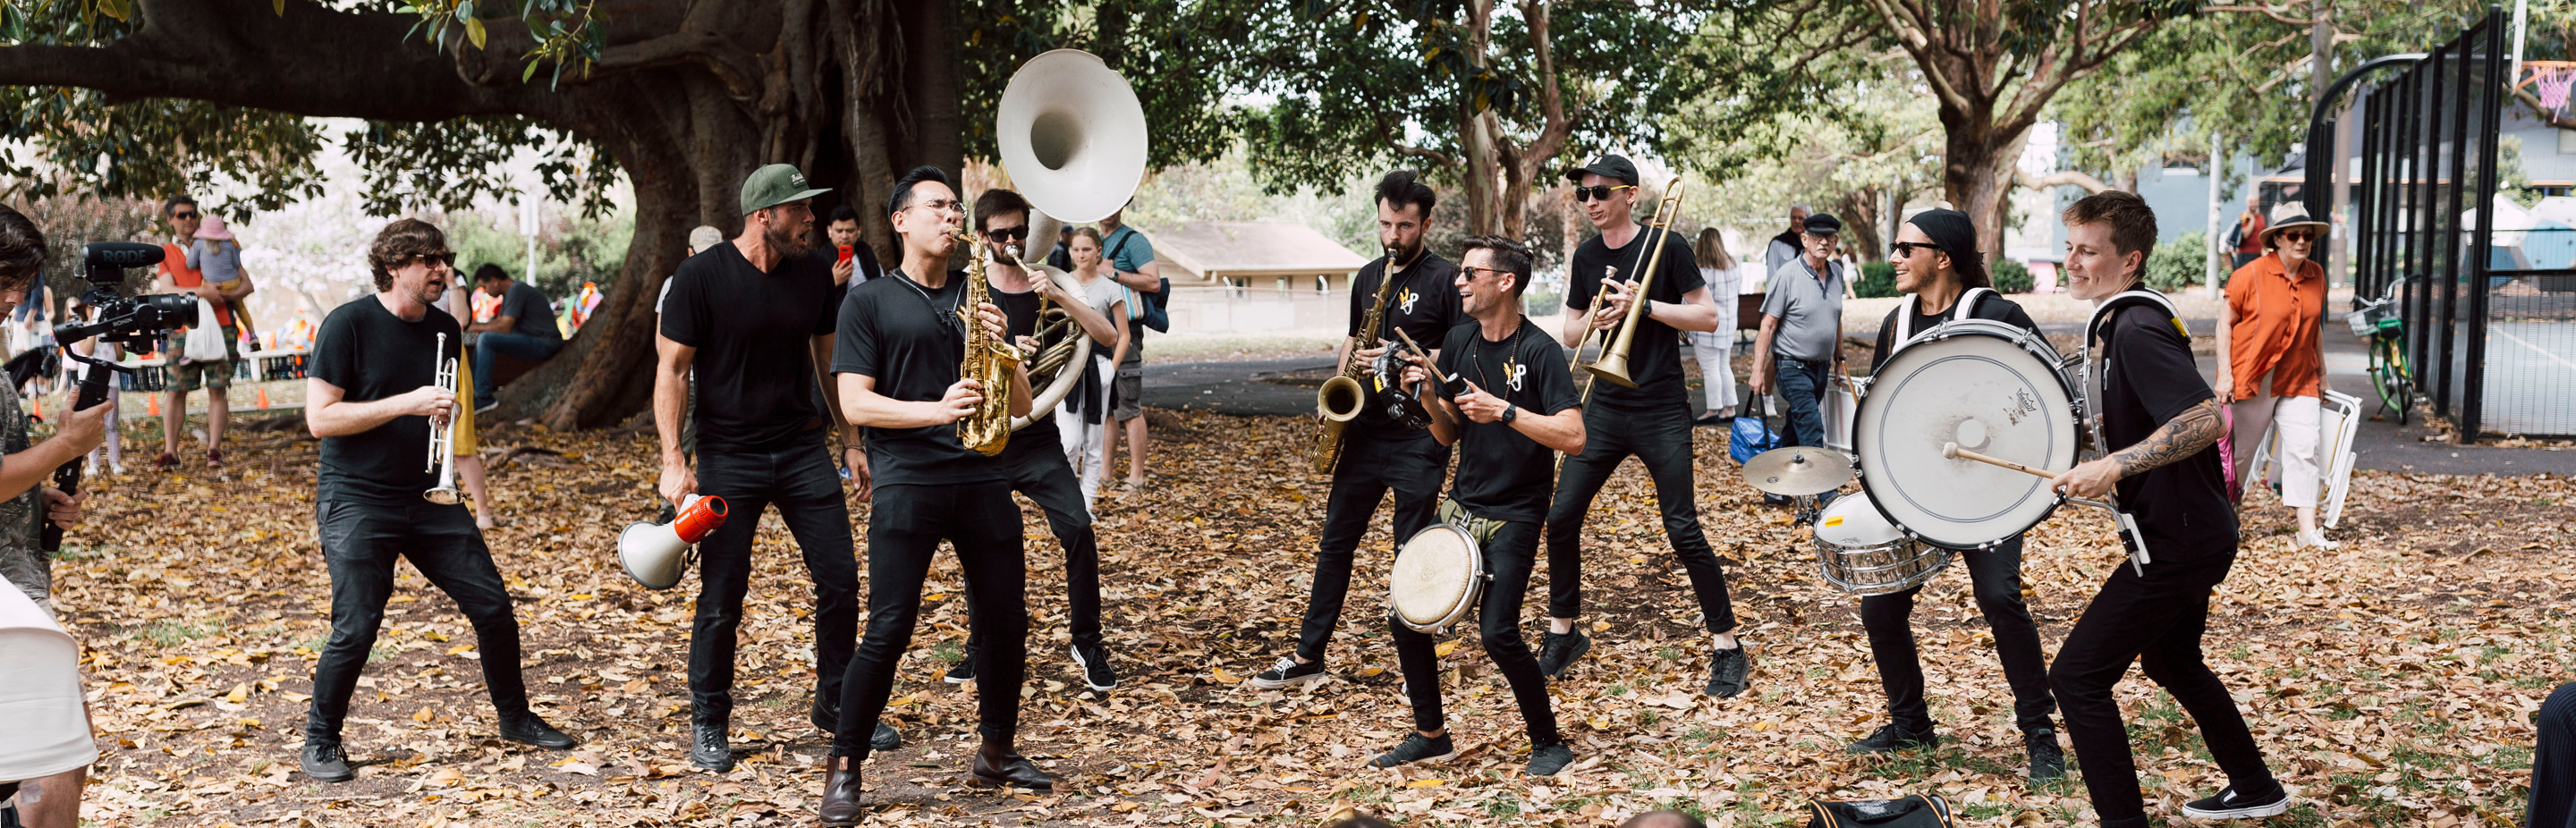 Musicians with brass instruments in a park